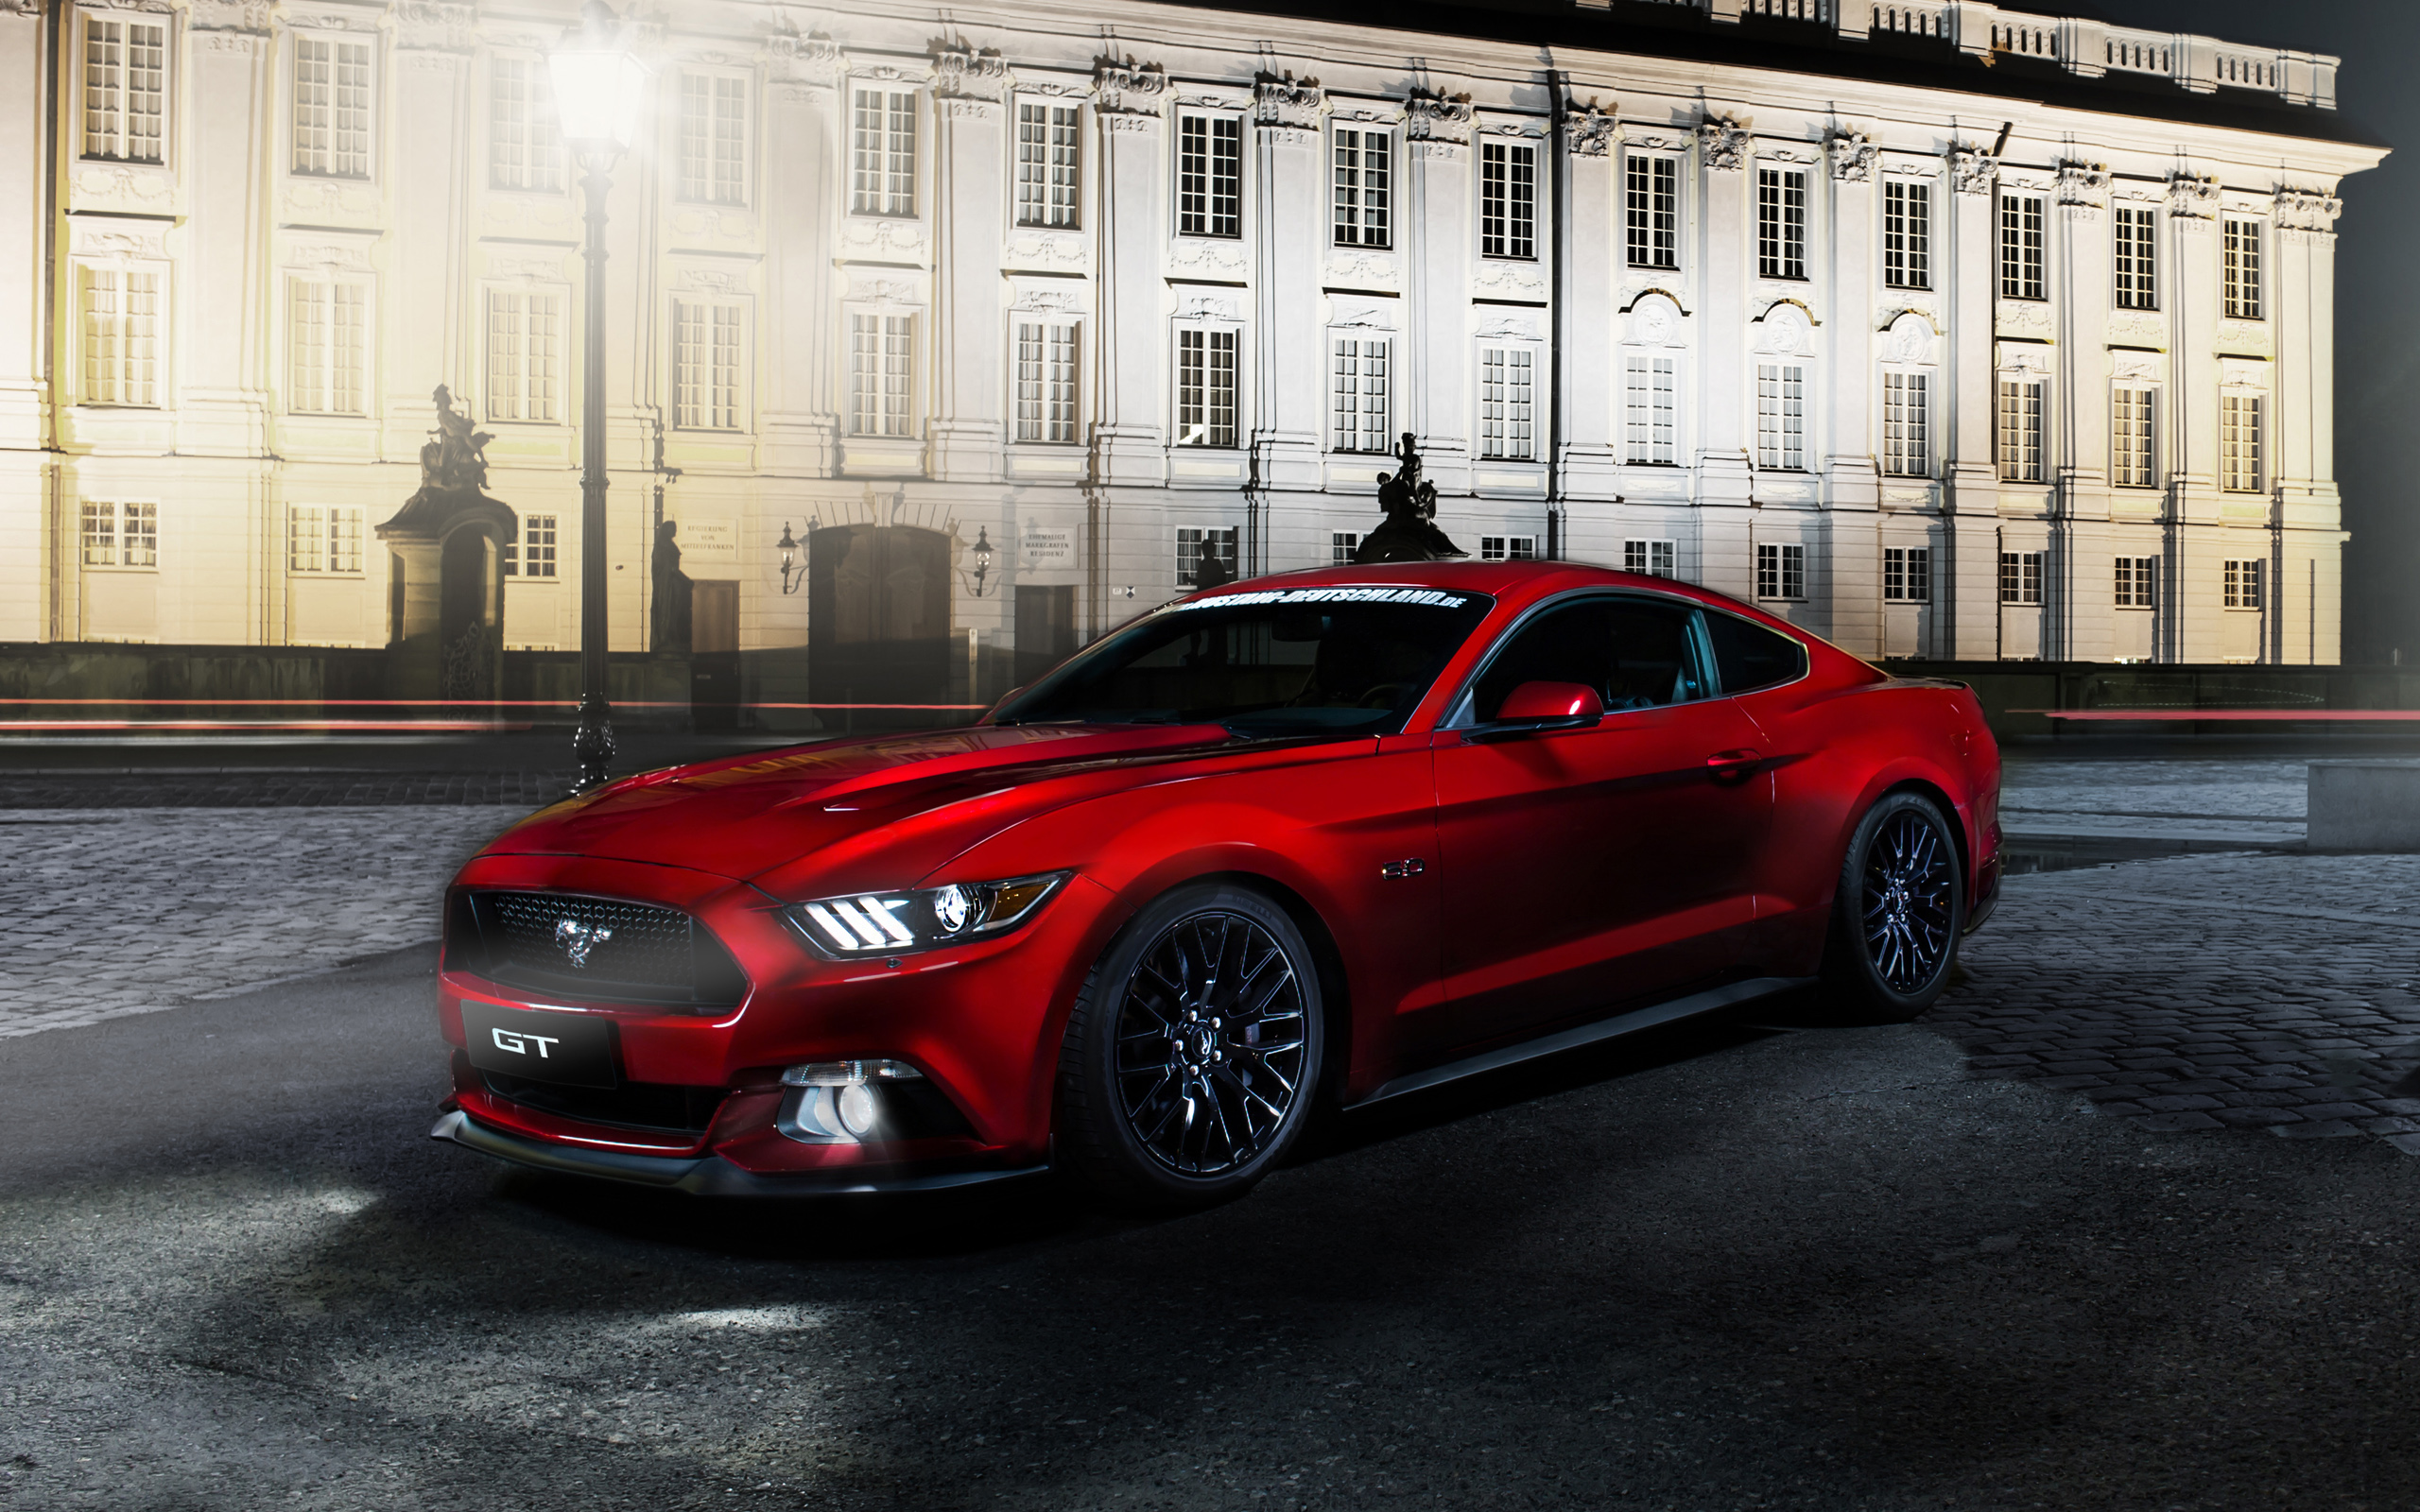 Ford Mustang GT 2015 Wallpaper | HD Car Wallpapers | ID #5461
 2015 Ford Mustang Wallpaper Hd